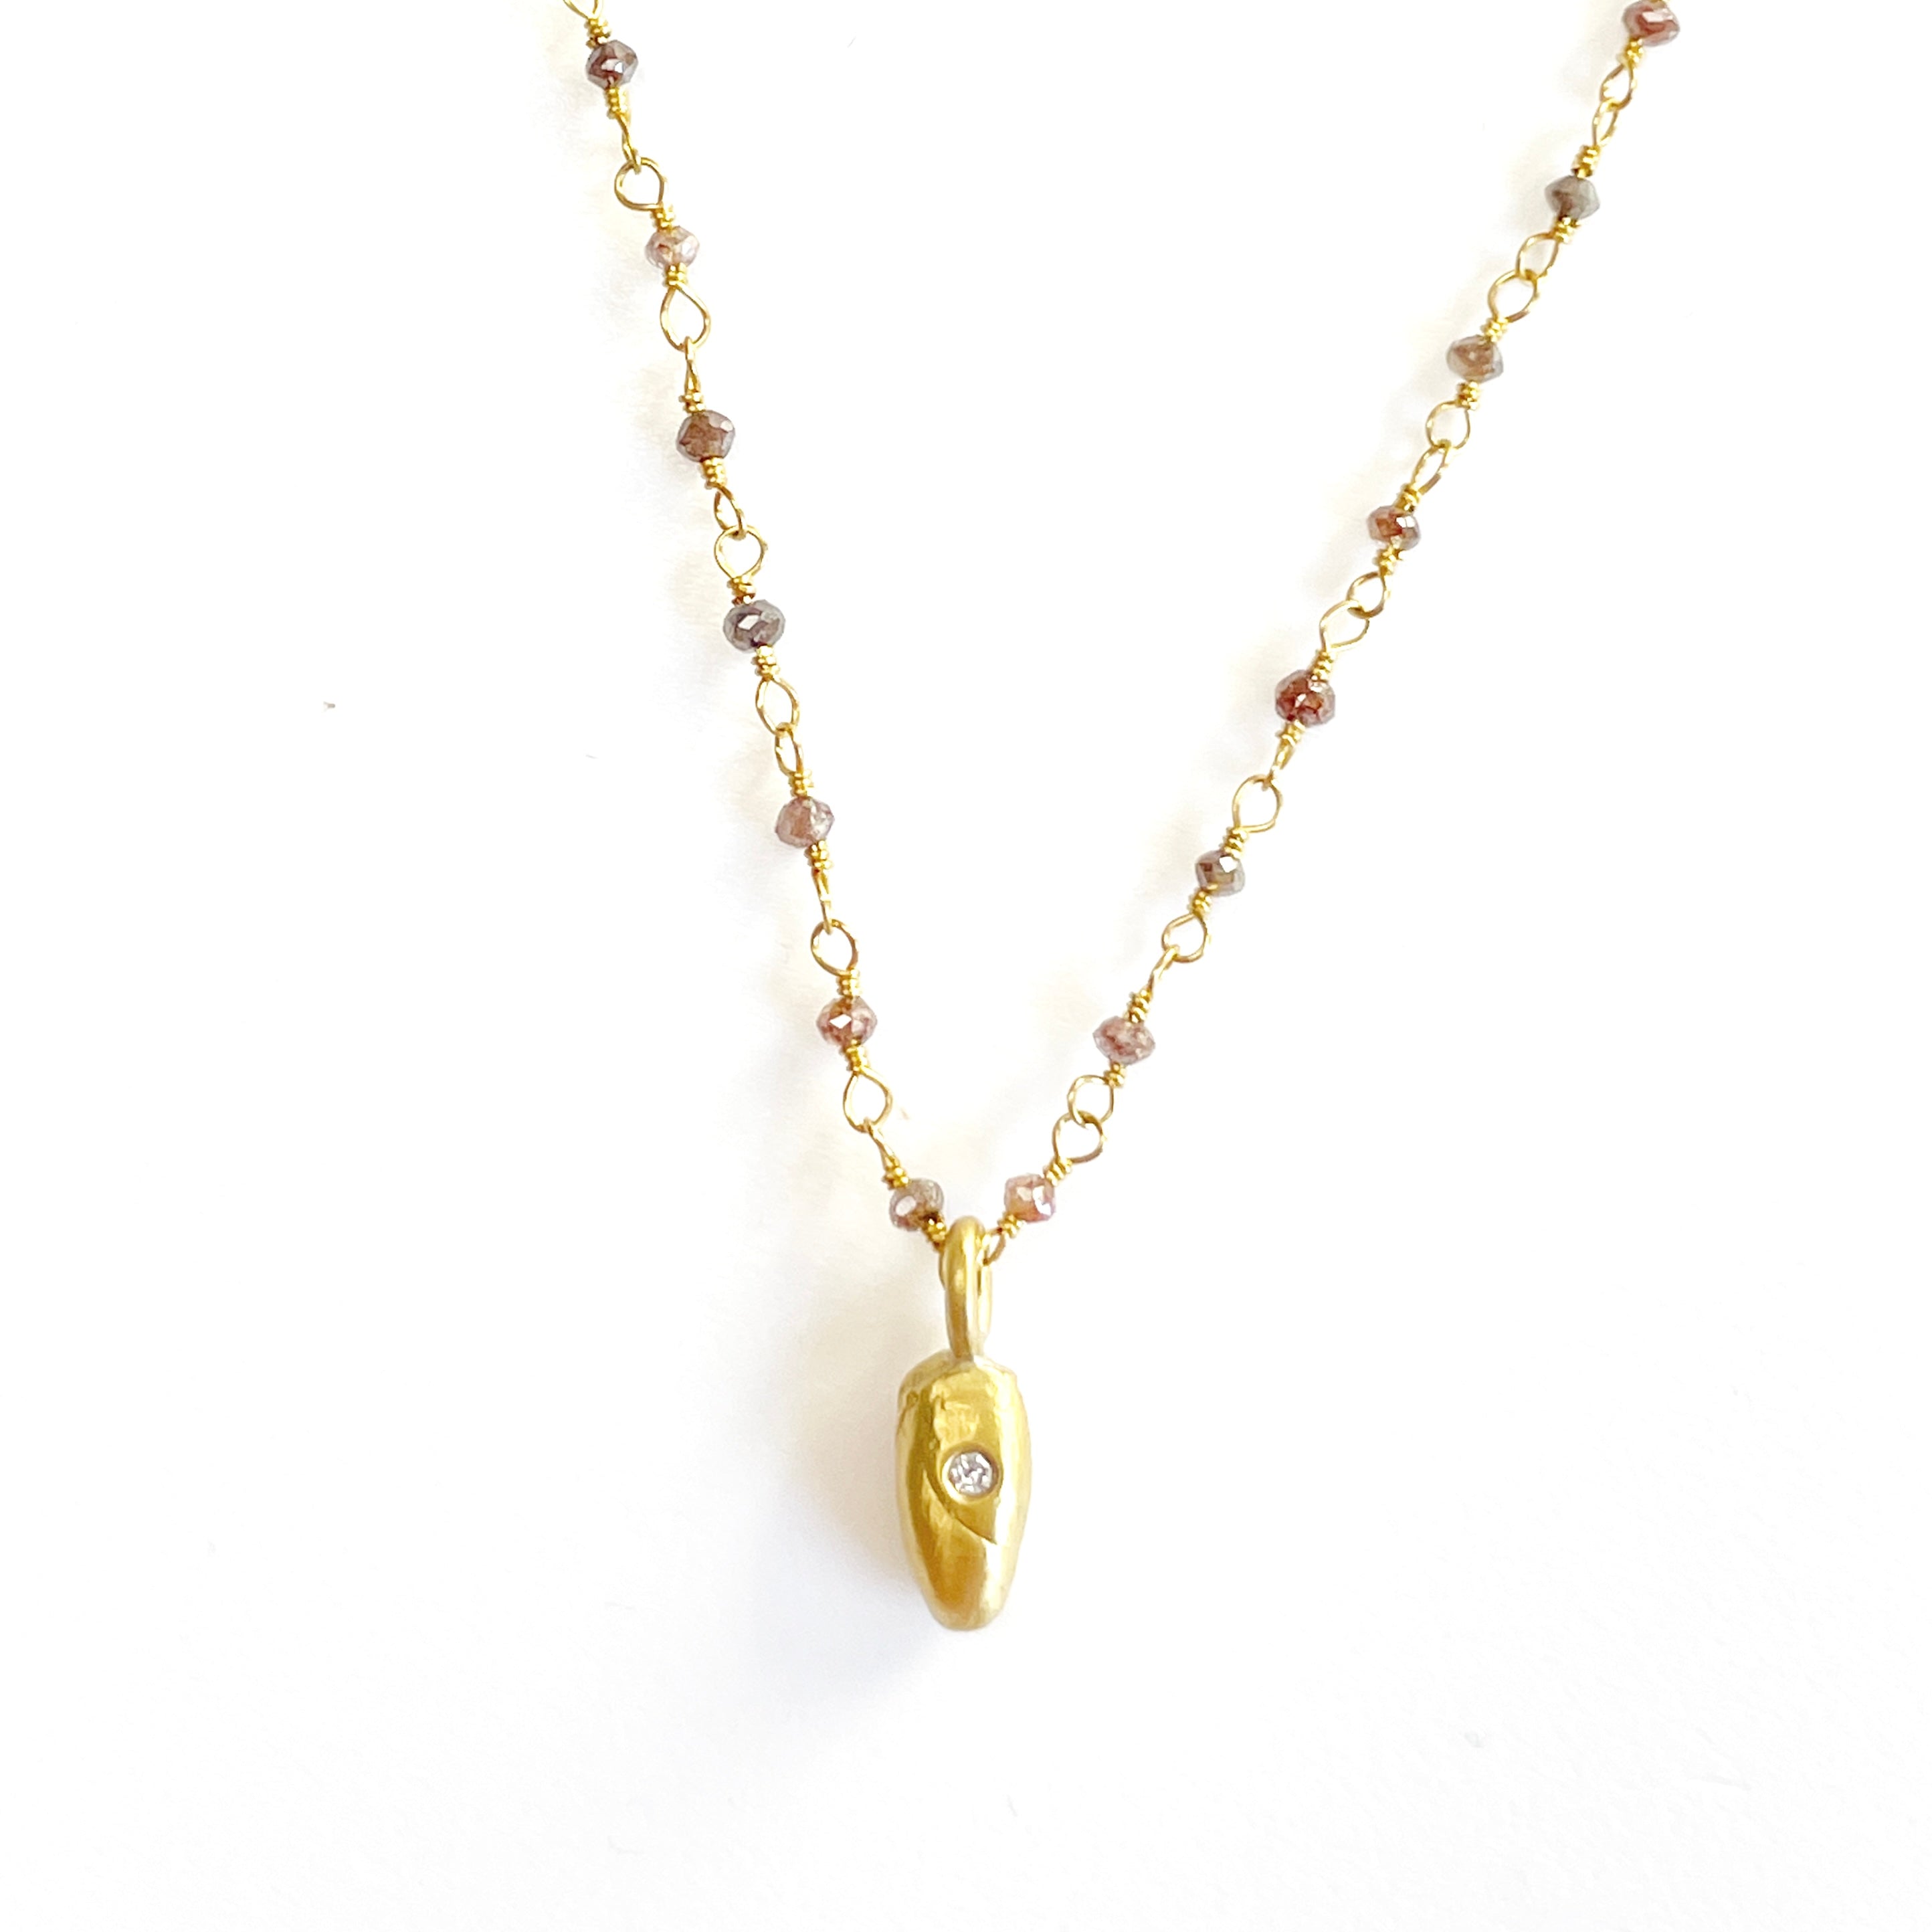 Hope Drop Charm on a Diamond and Gold Chain Necklace Solid Gold